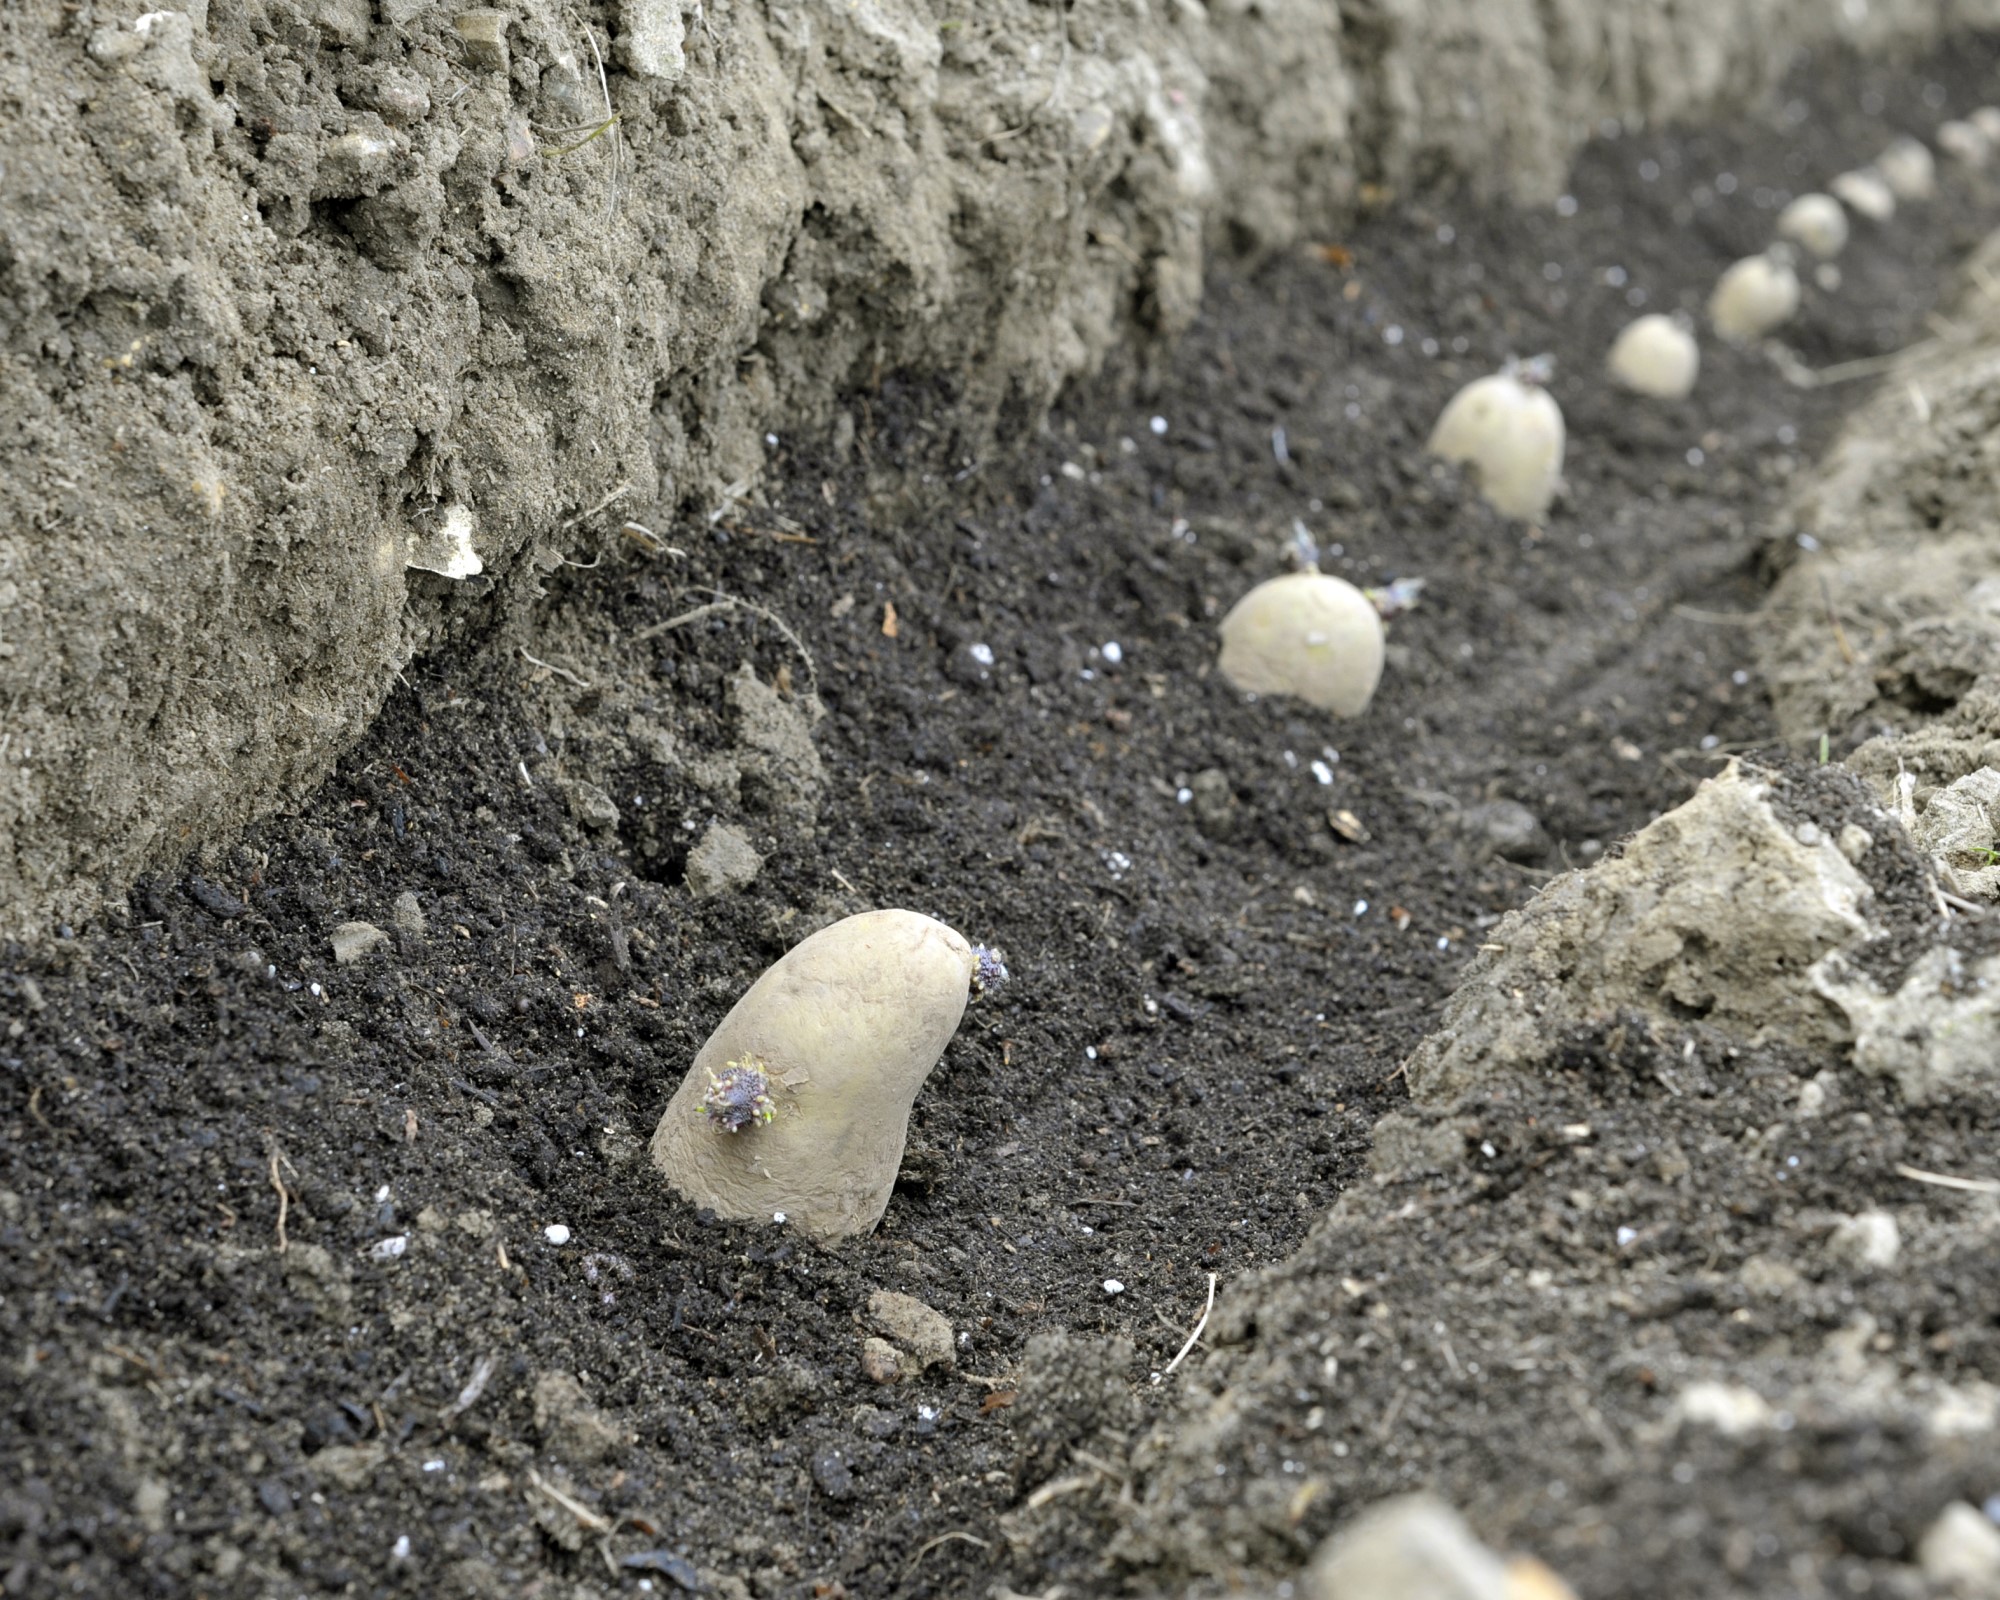 Chitted potatoes planted in a trench